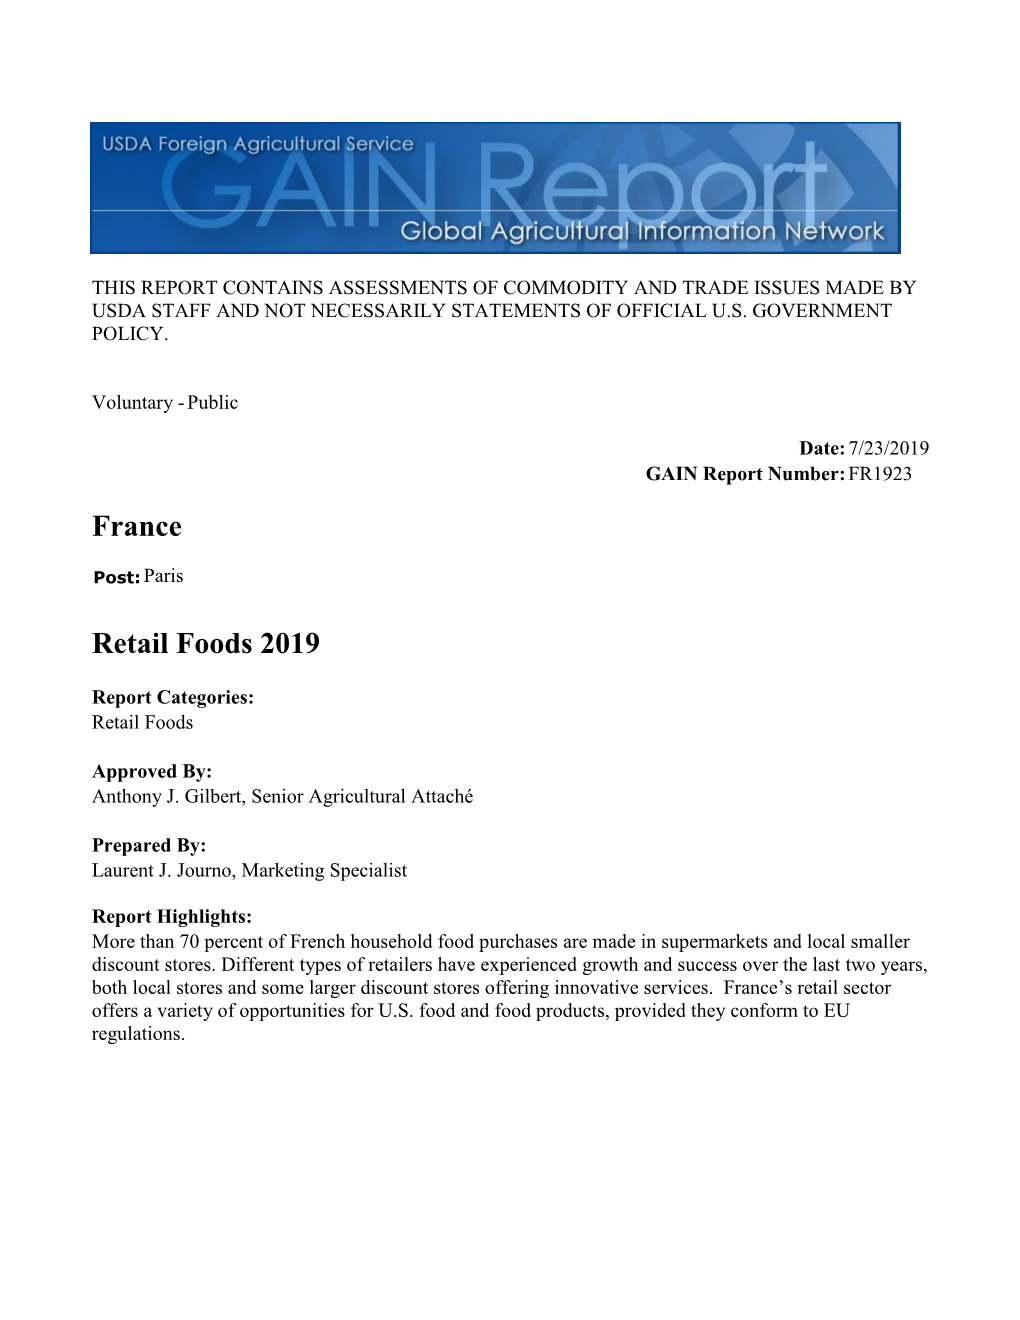 France Retail Foods 2019